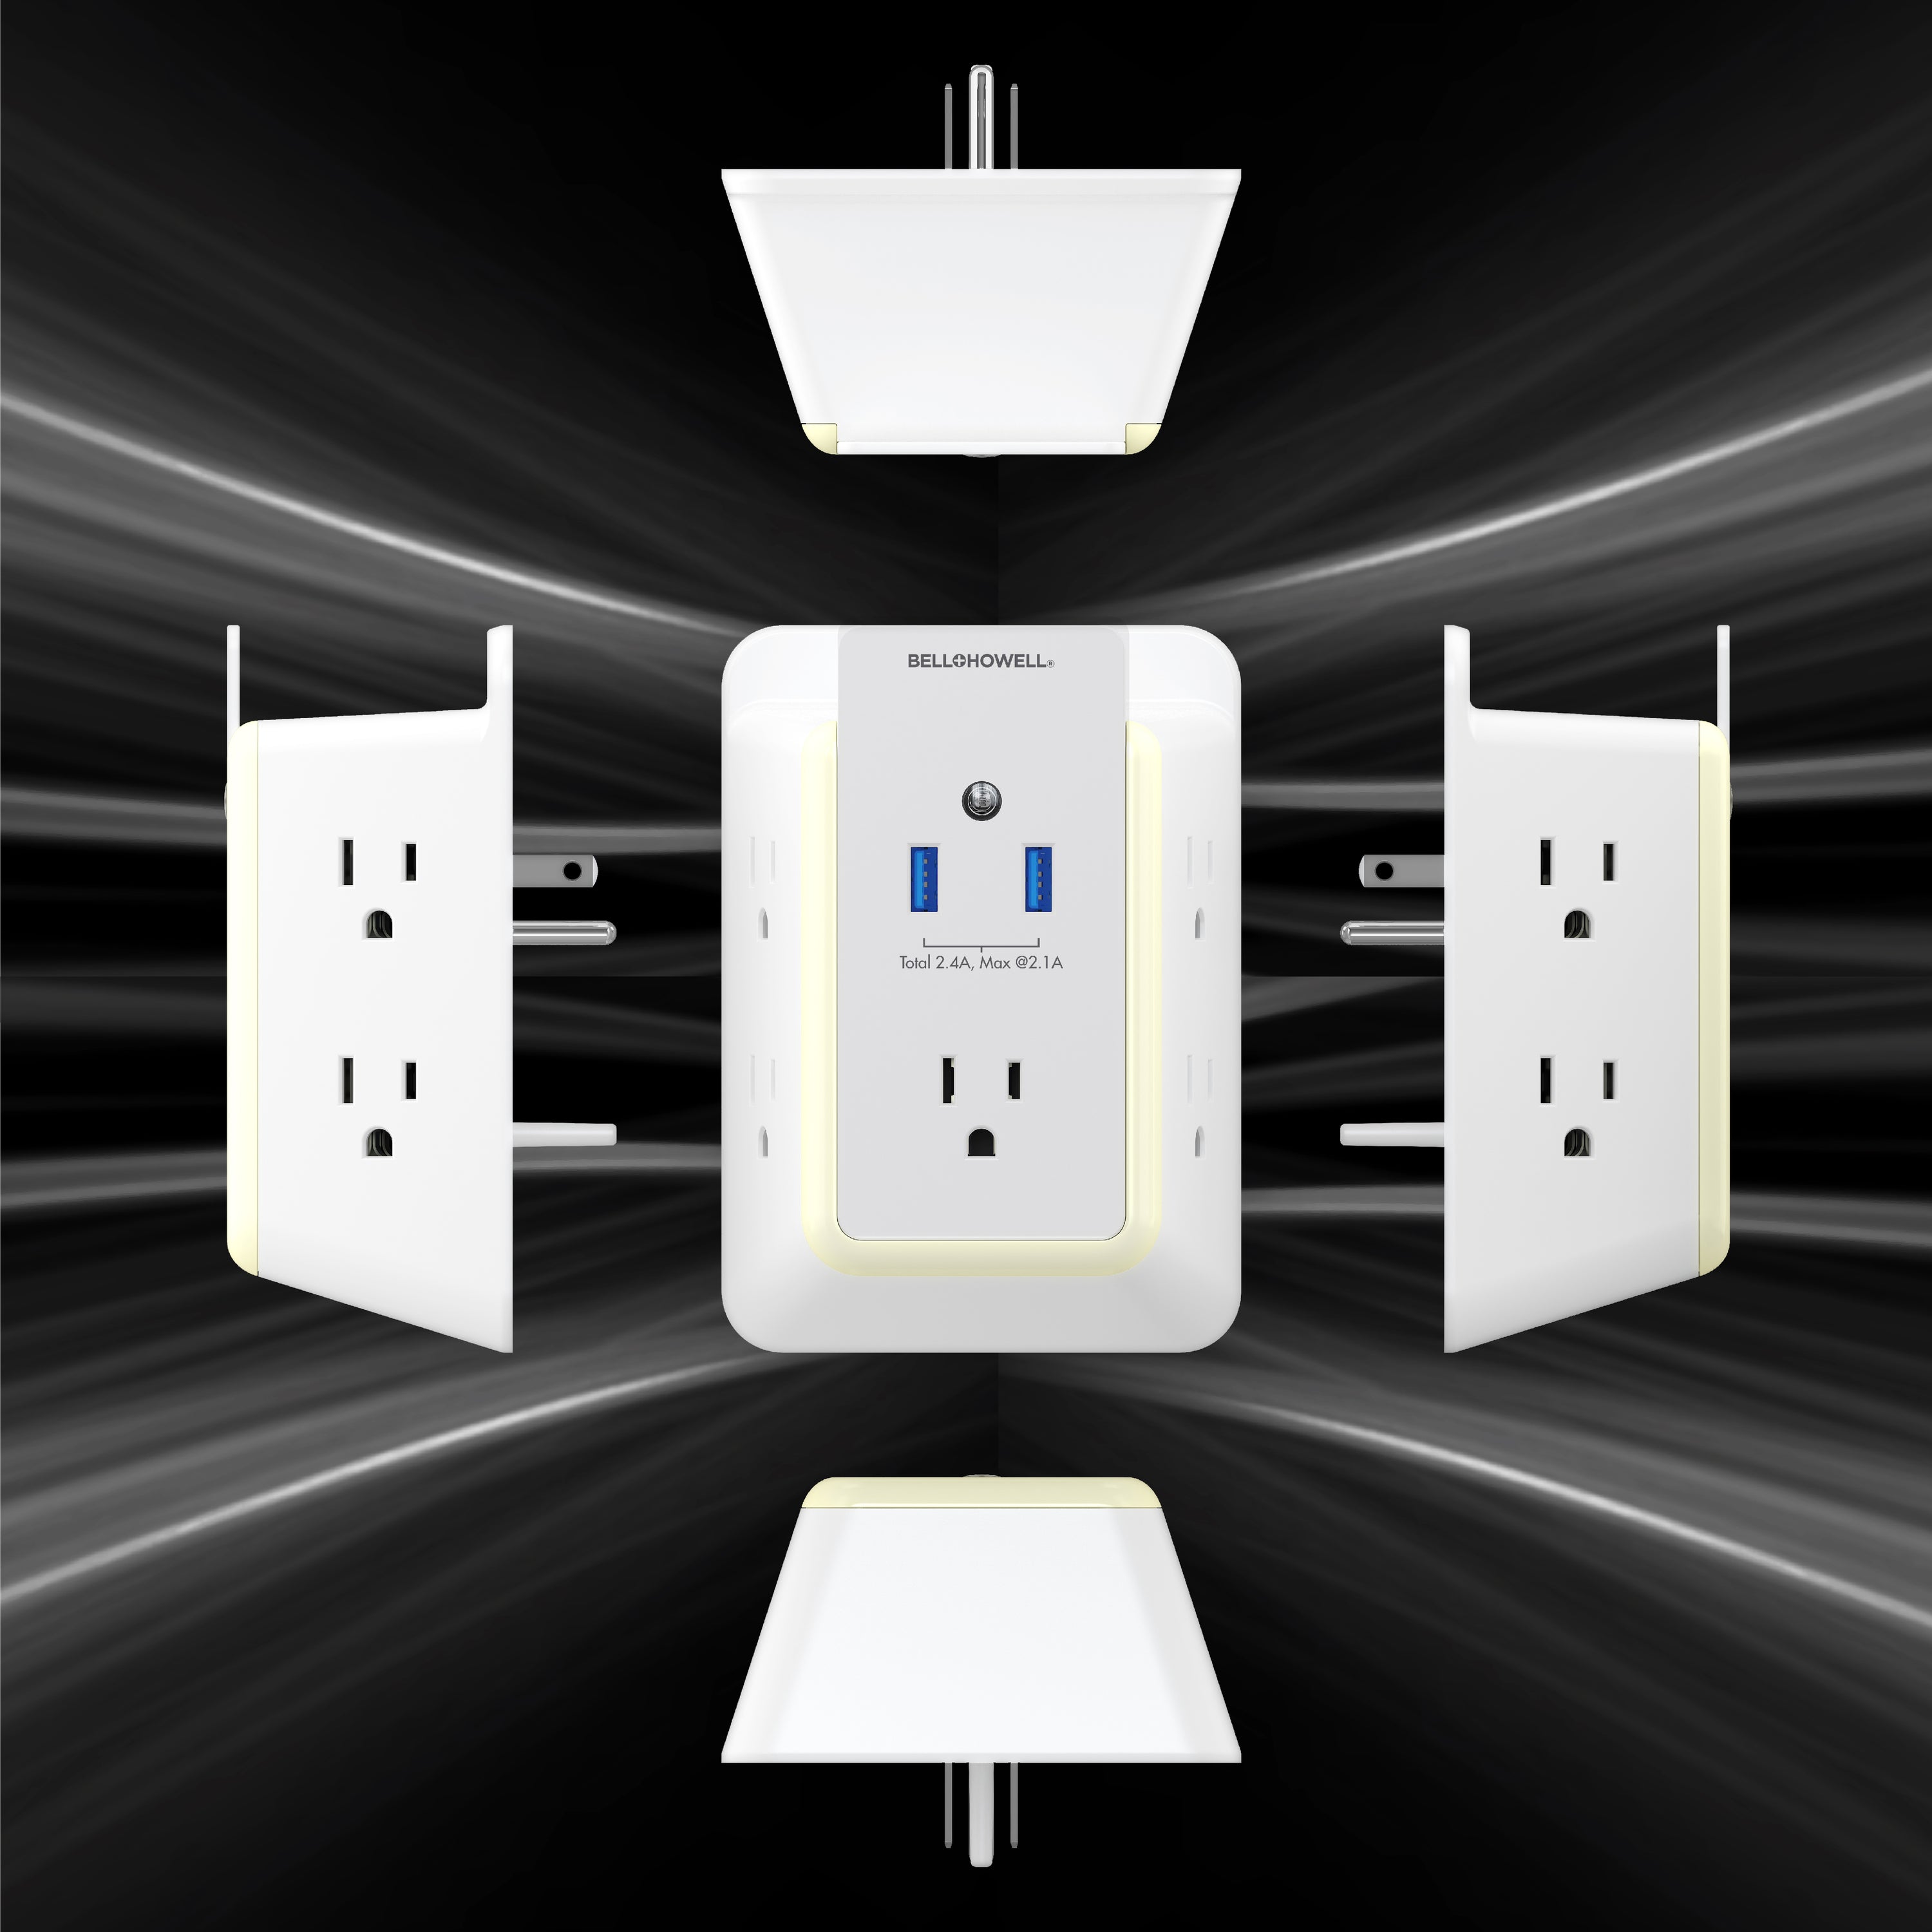 Bell + Howell Wall Power Surge Protector with Night Light (Automatic) and Device Holder, 5 Outlets 2 USB Ports Electrical Extender, White, 5.5"